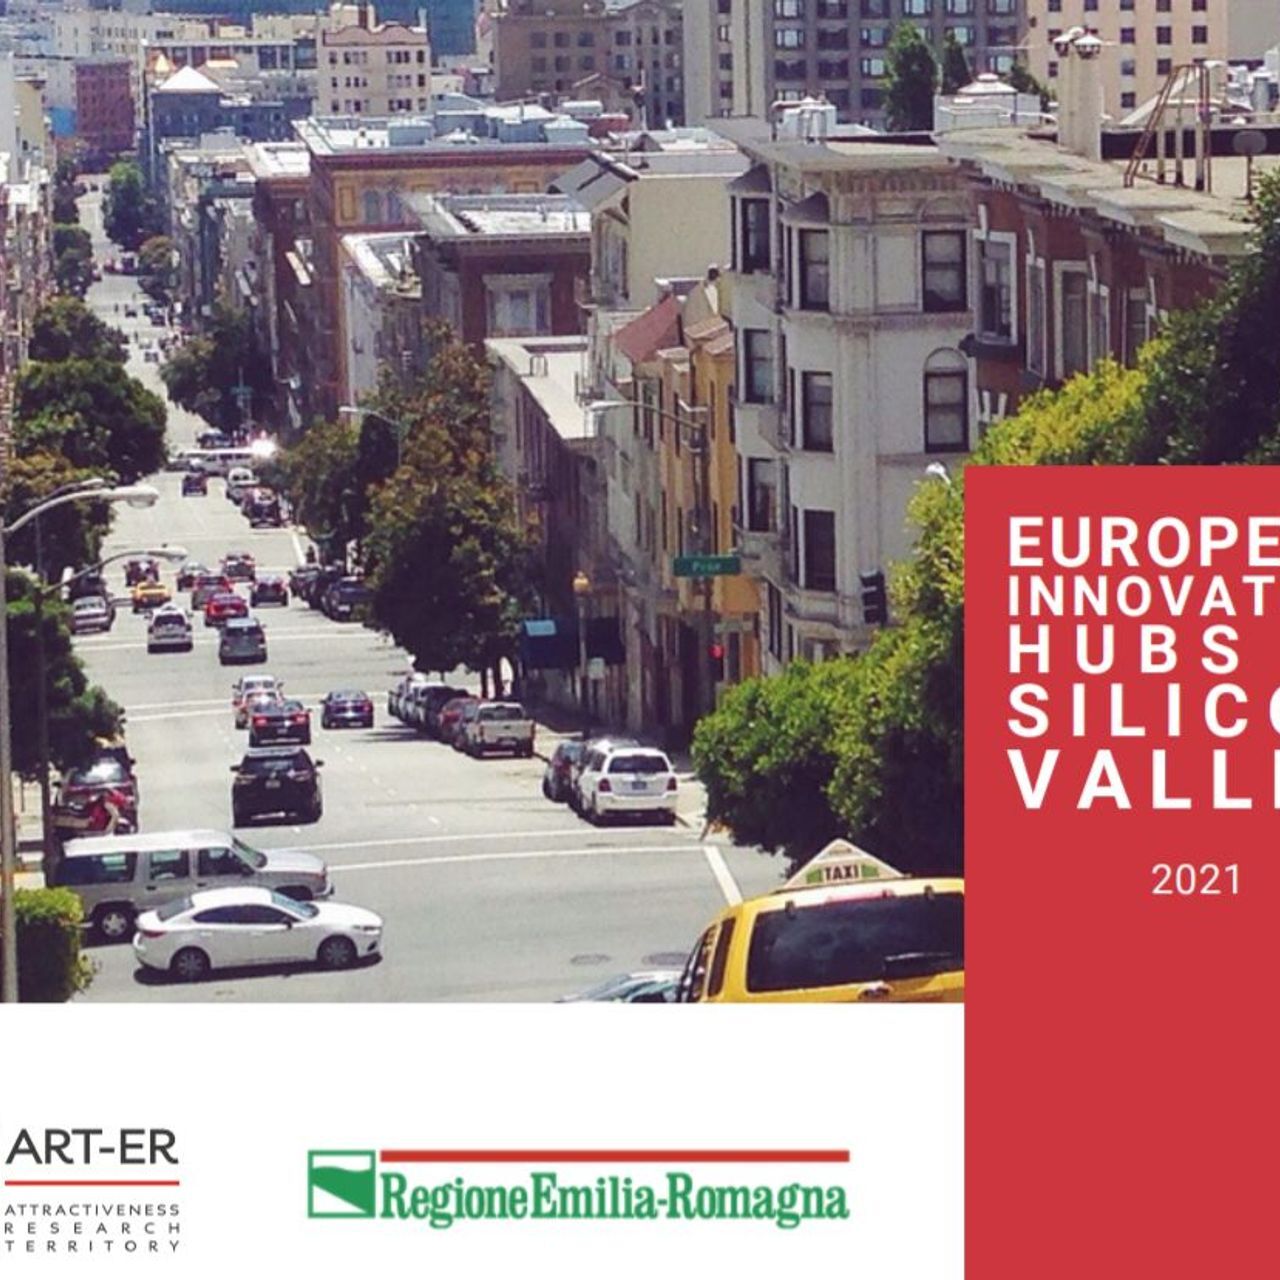 The cover of the report “European Innovation Hubs in Silicon Valley 2021”